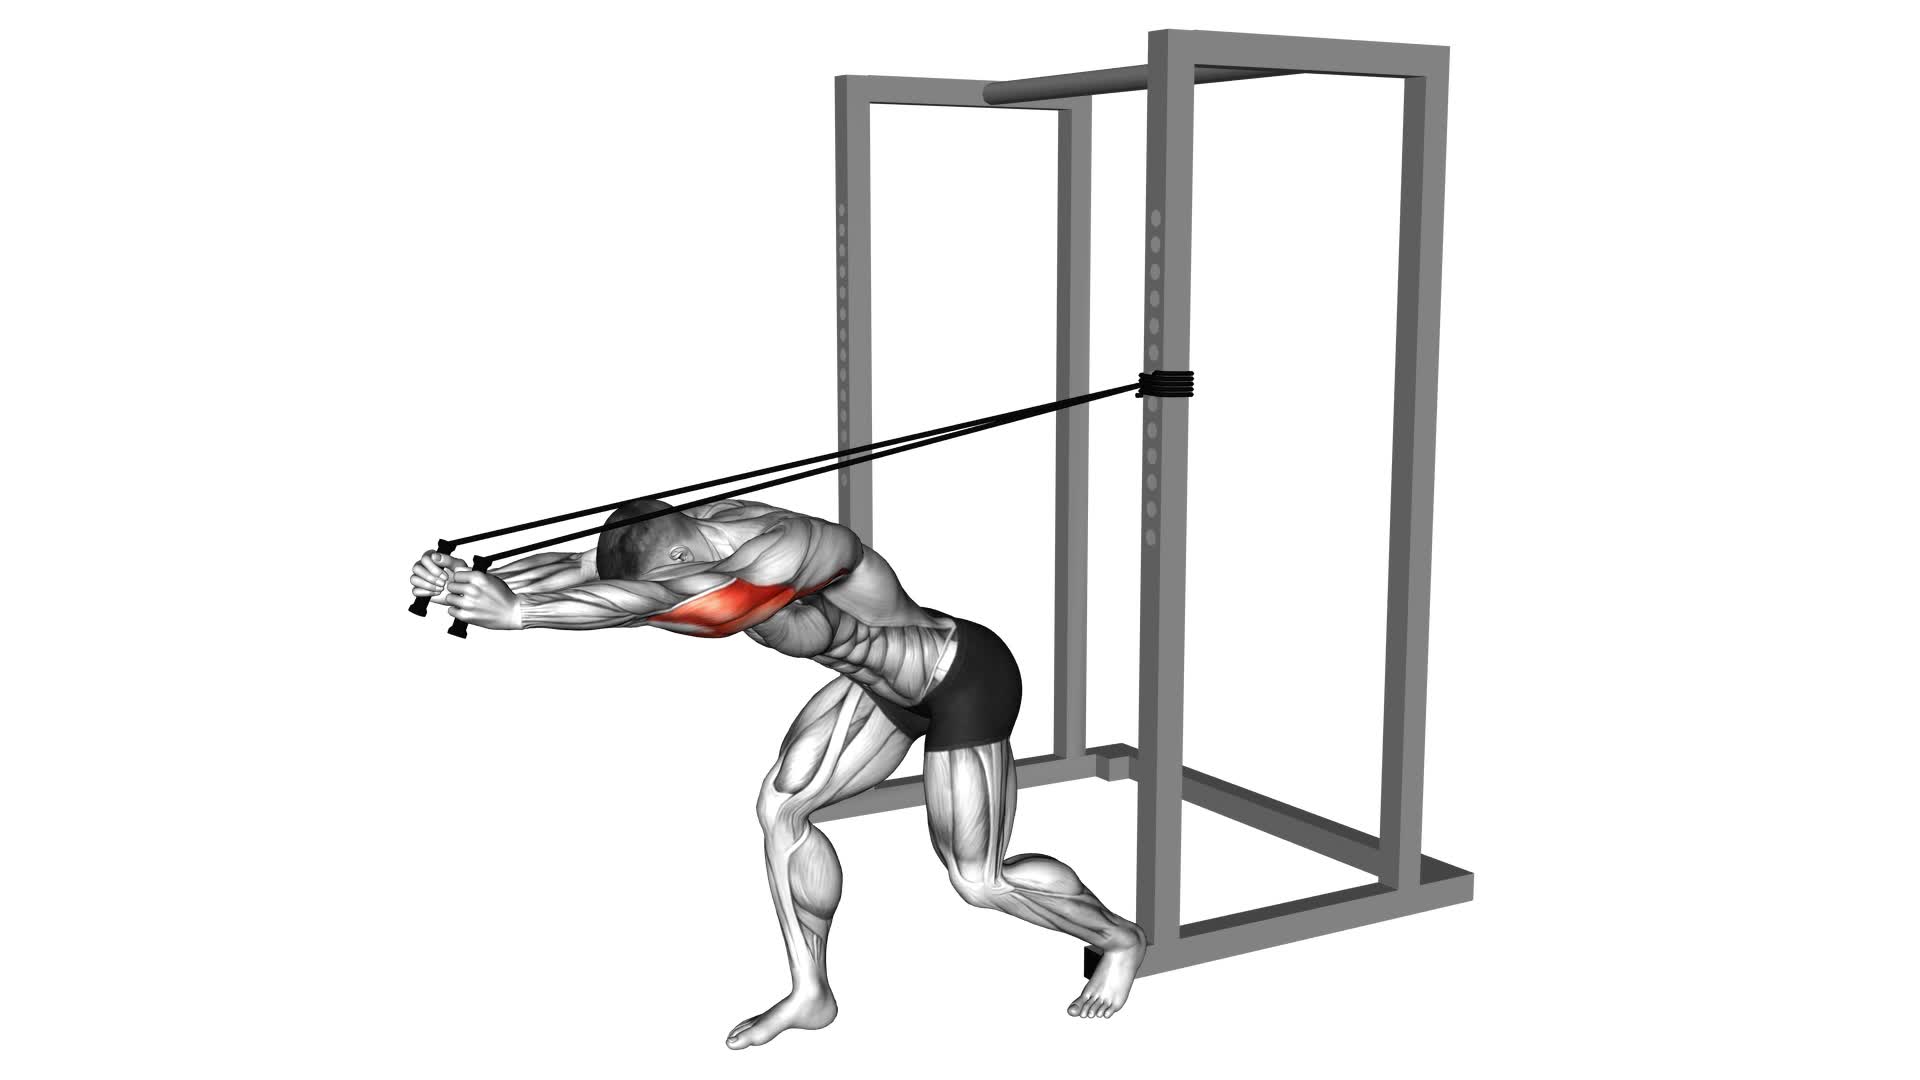 Band High Pulley Overhead Triceps Extension - Video Exercise Guide & Tips